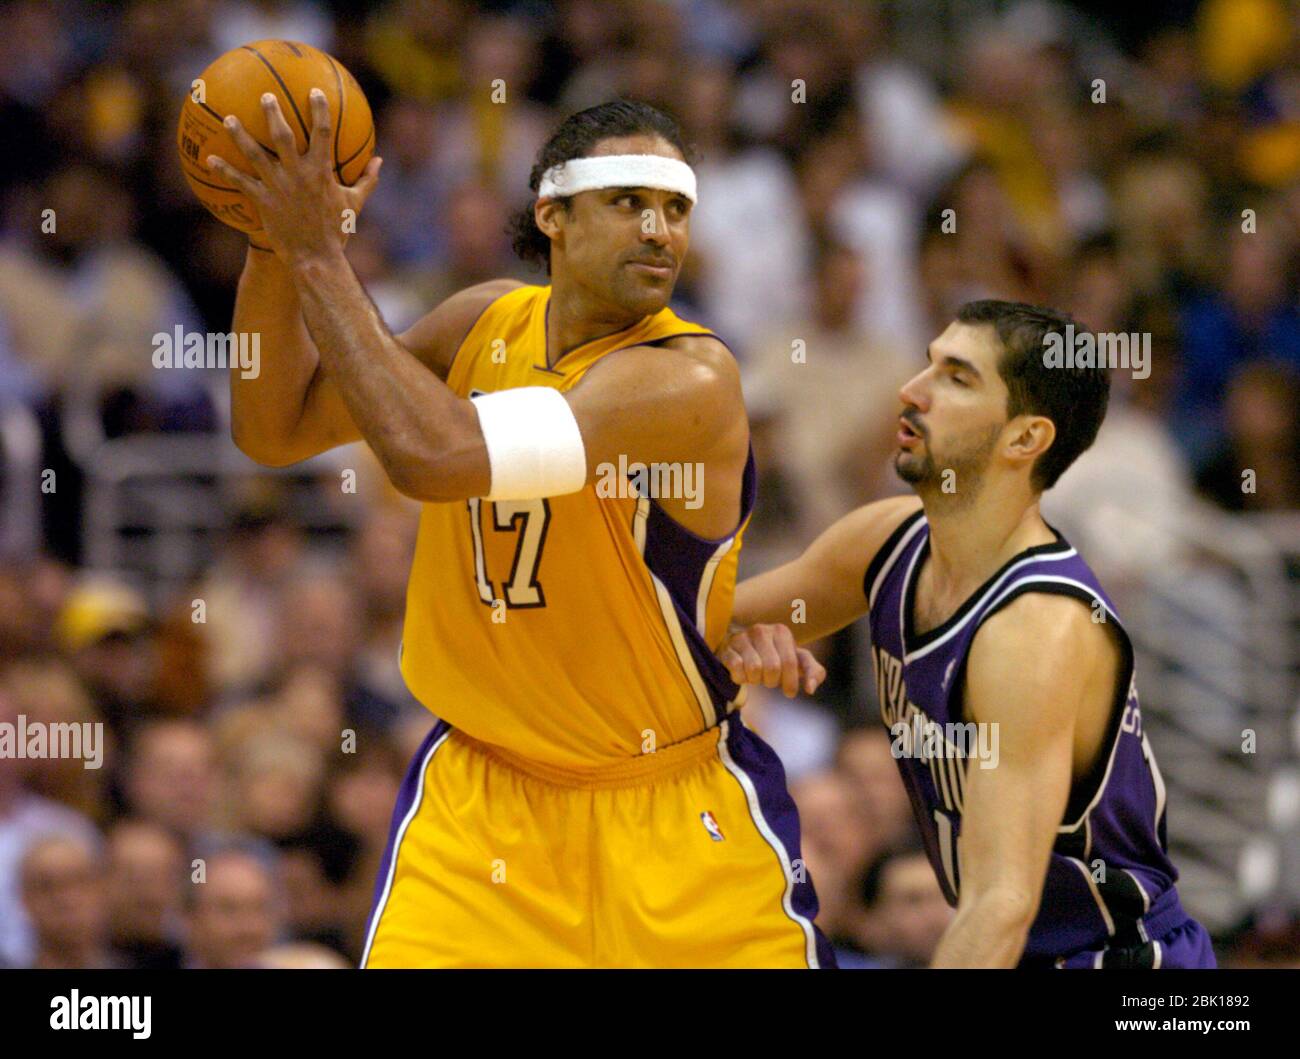 Rick Fox - Name the former NLC player trying to block my shot?